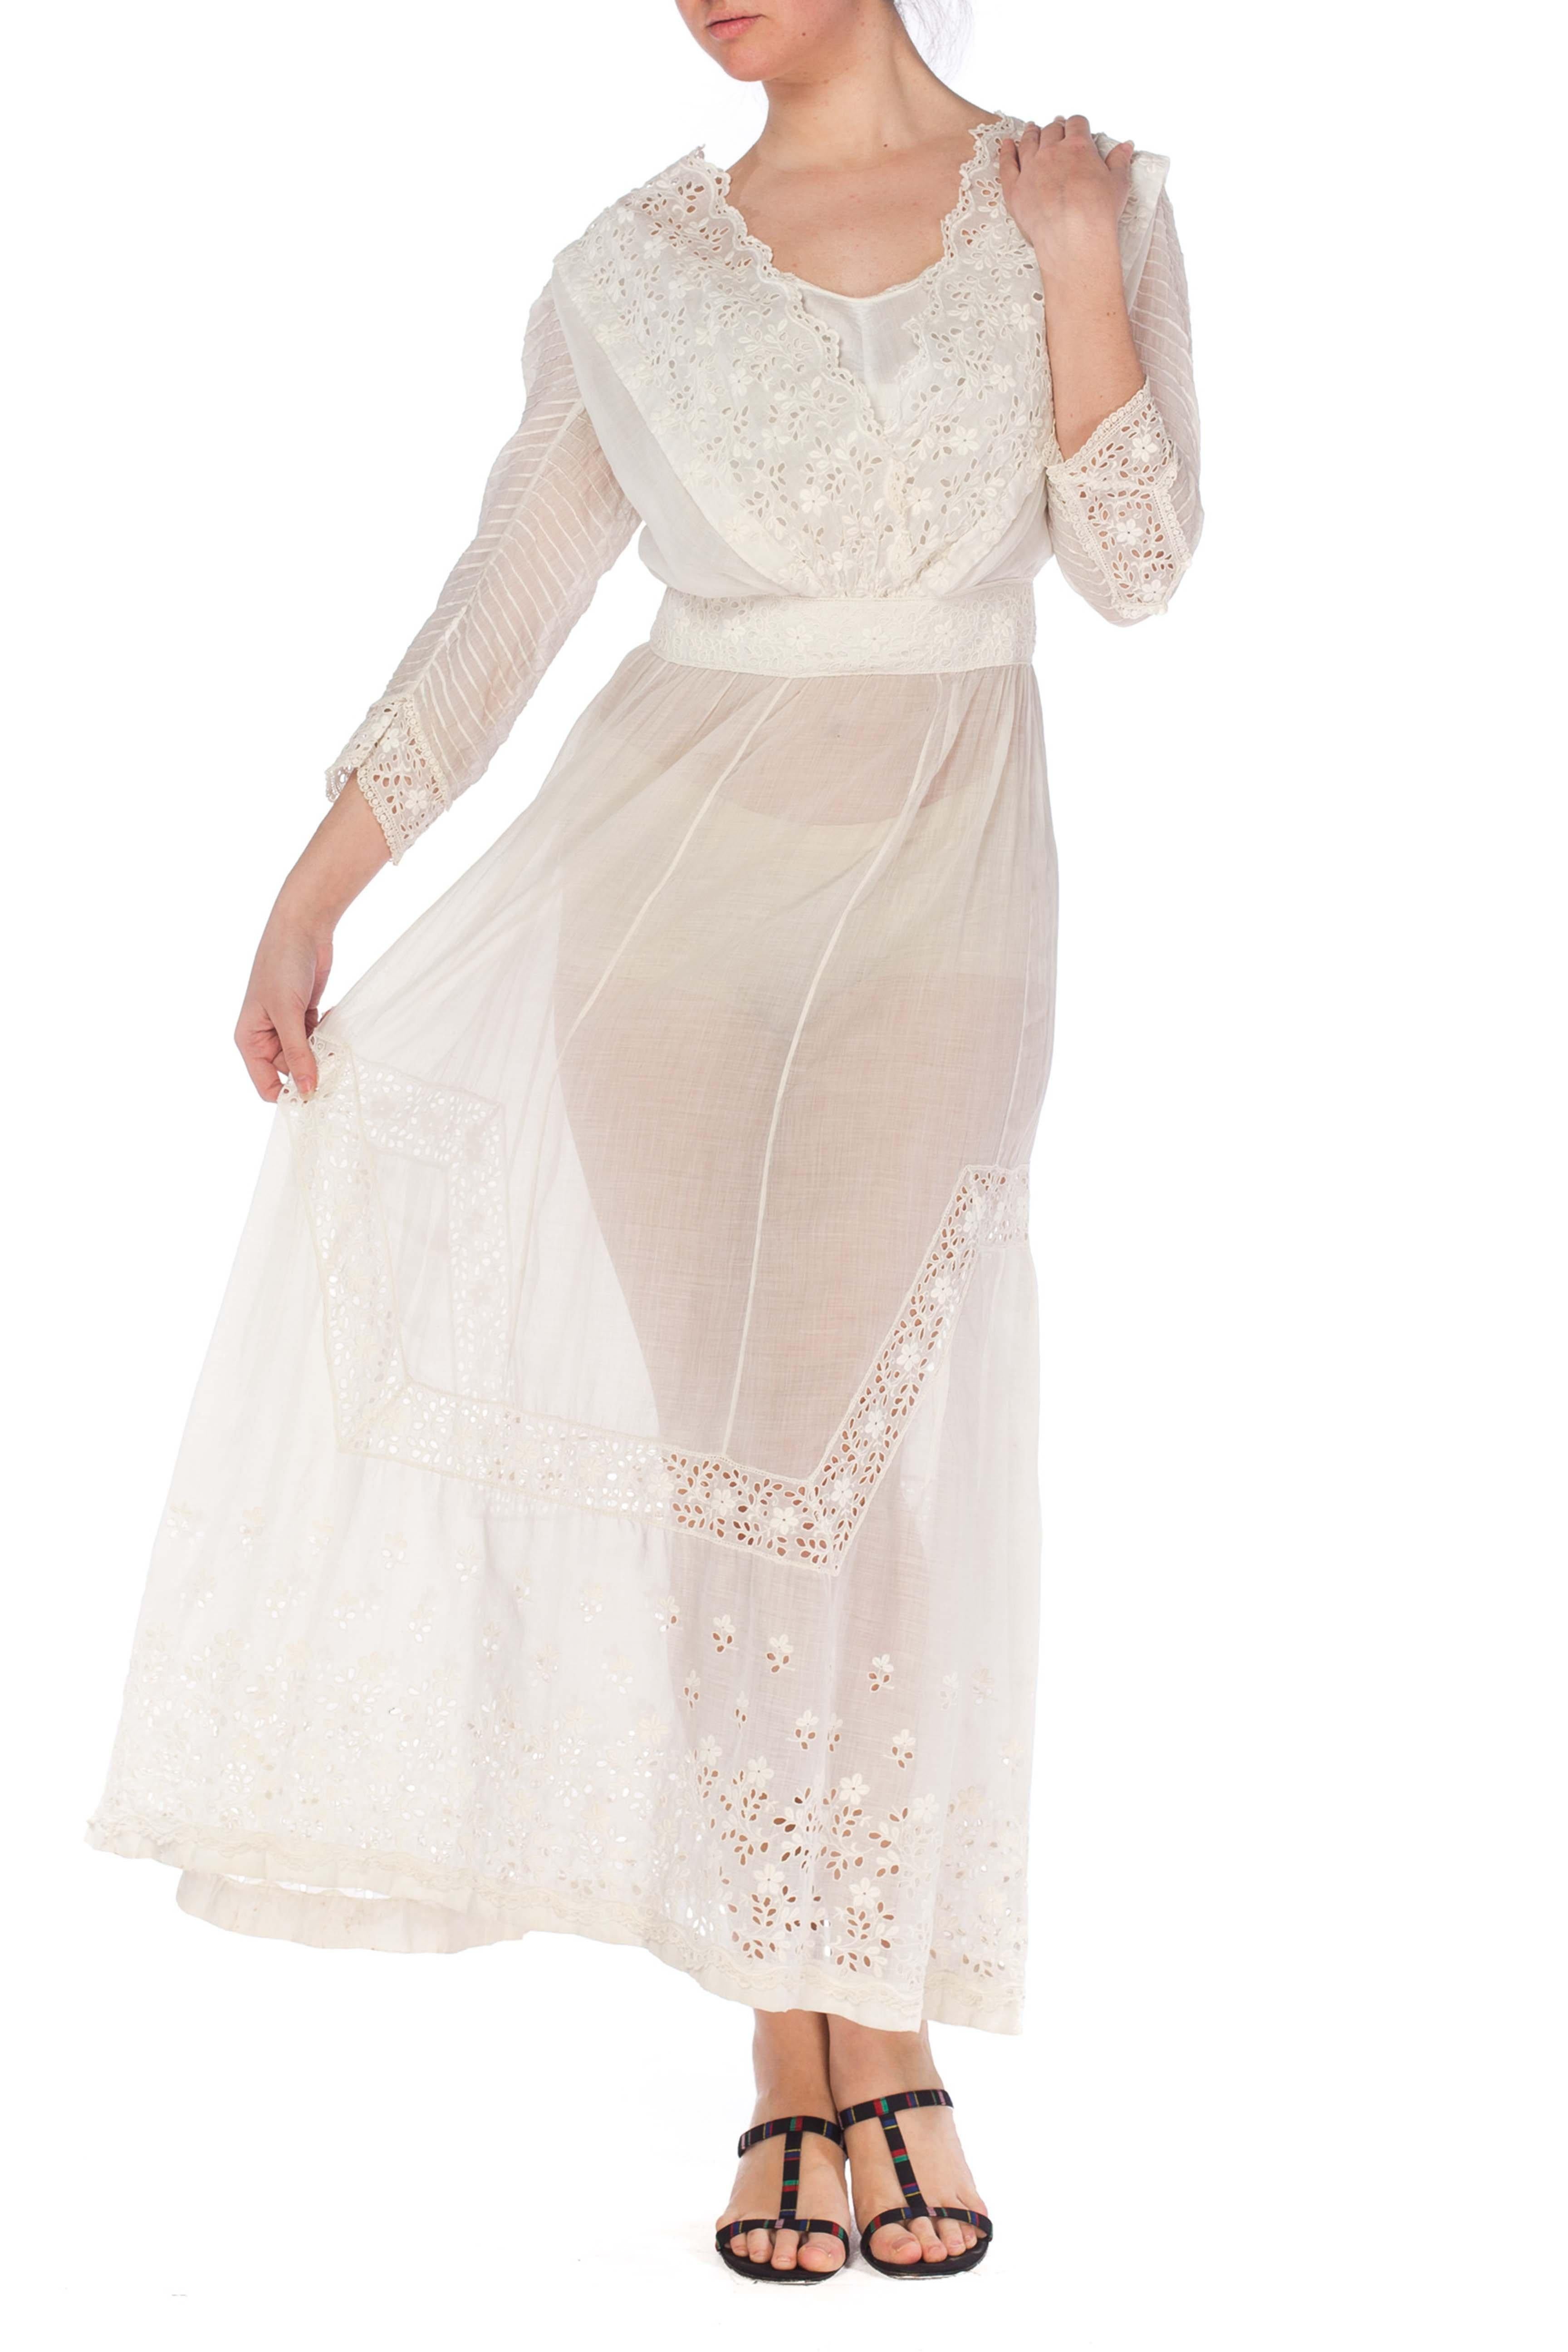 1900S White Cotton Lawn & Edwardian Eyelet Lace Dress With Pintucked Sleeves For Sale 1